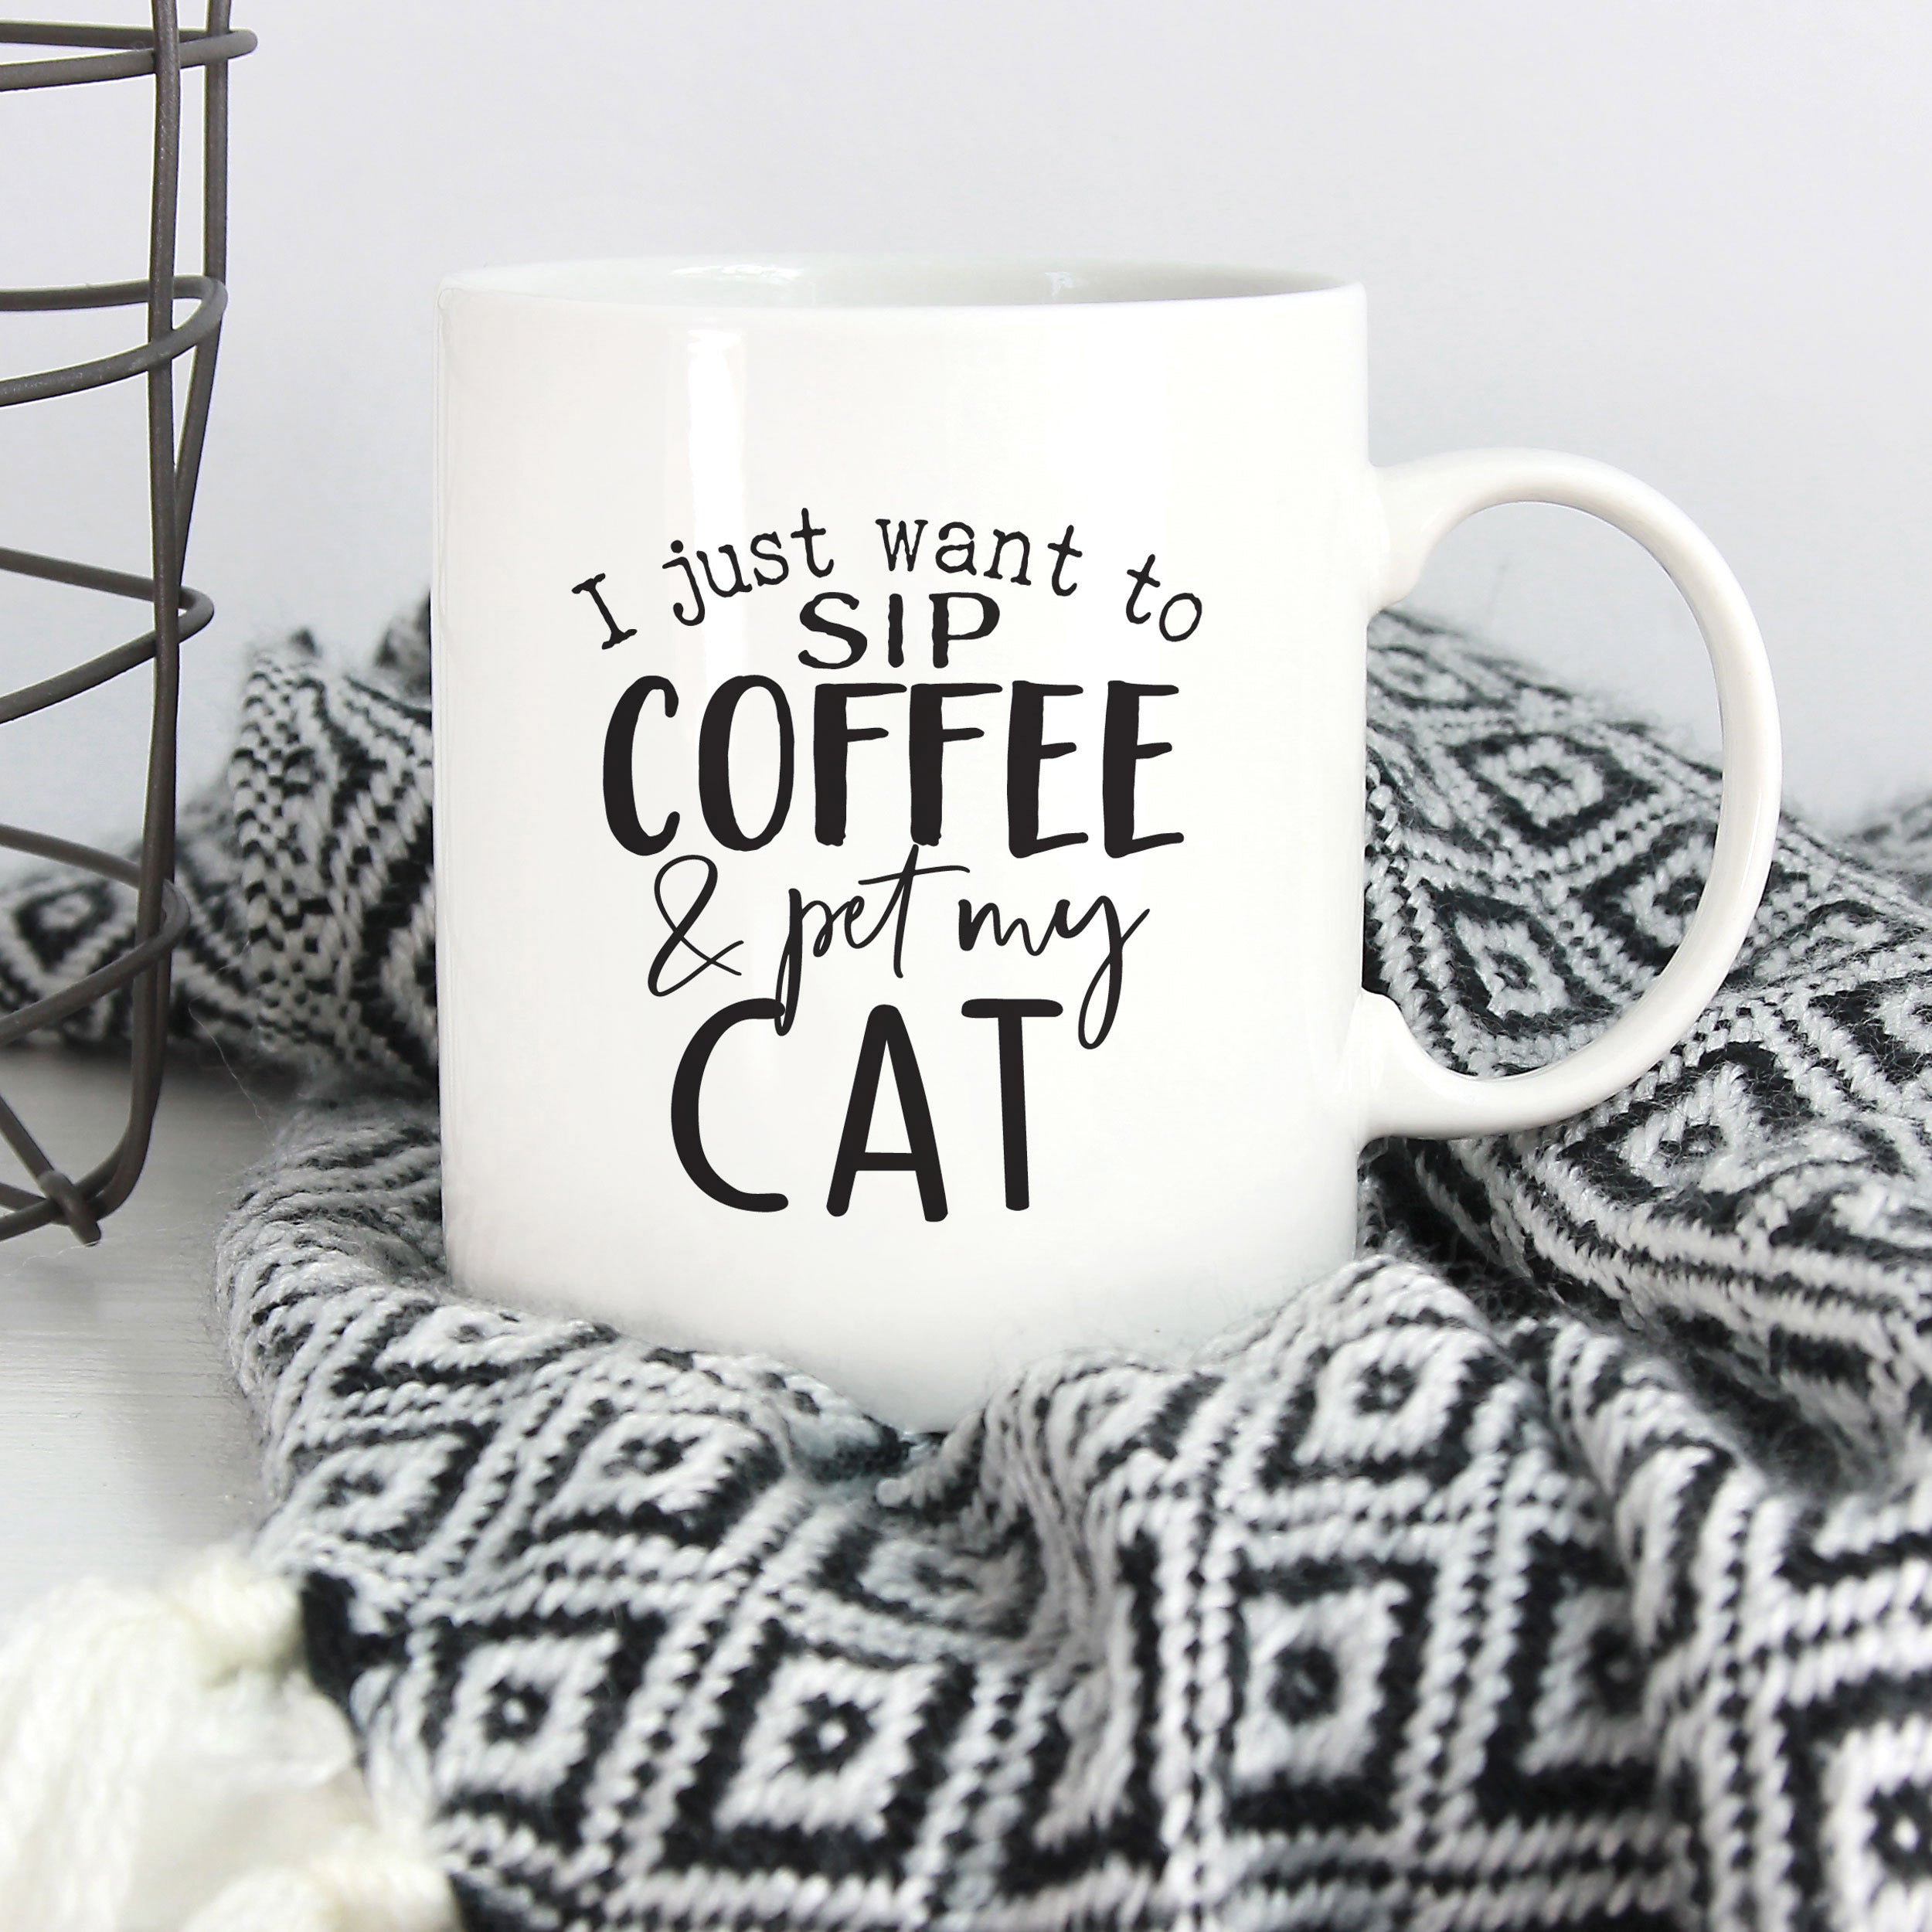 I Just Want To Sip Coffee And Pet My Cat Mug